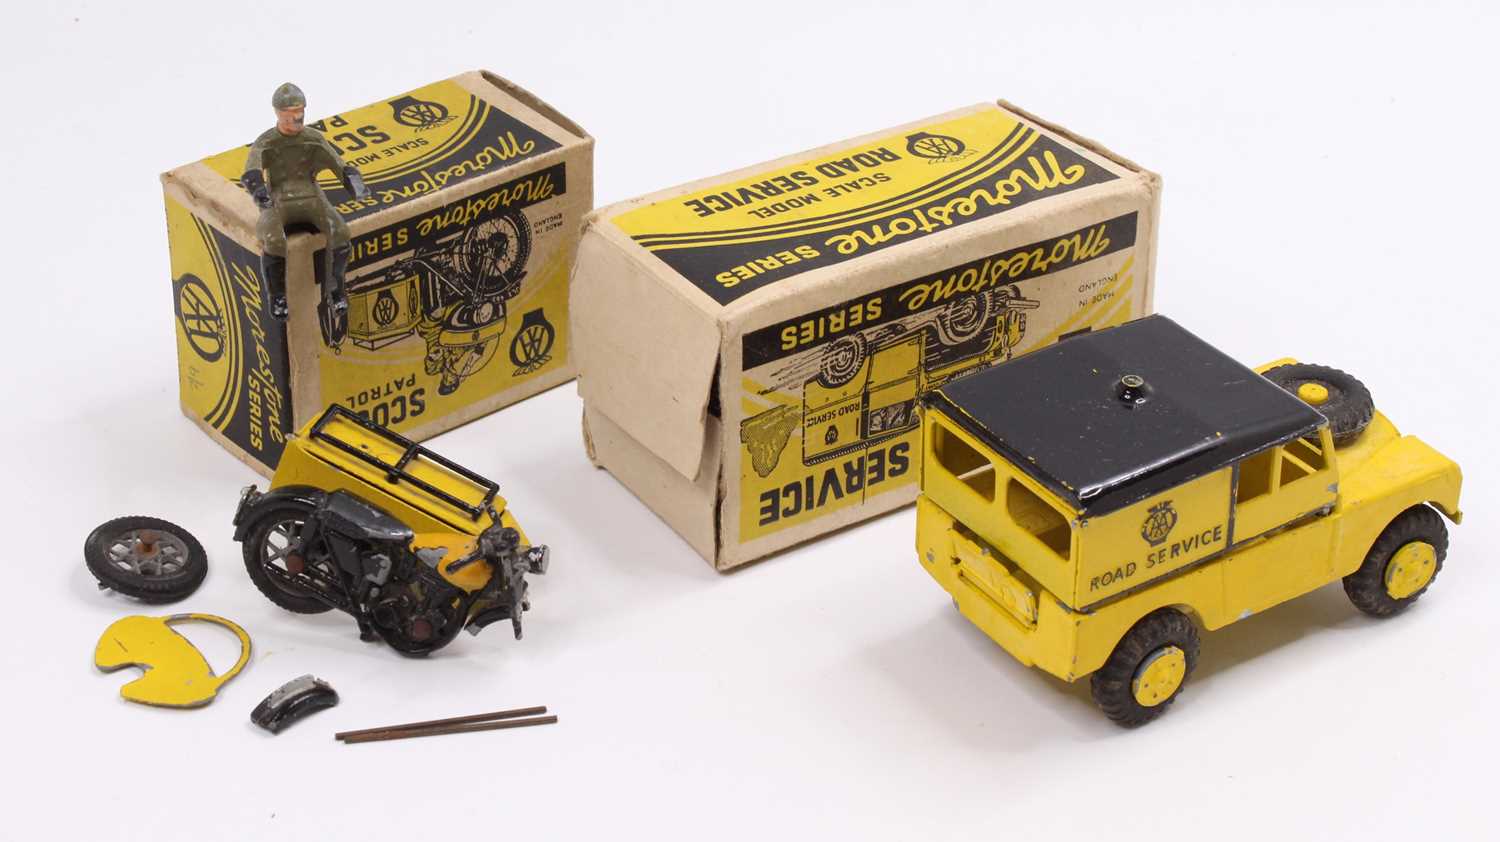 A boxed Morestone series scout patrol car with matching AA road service delivery van, both boxes - Image 2 of 2